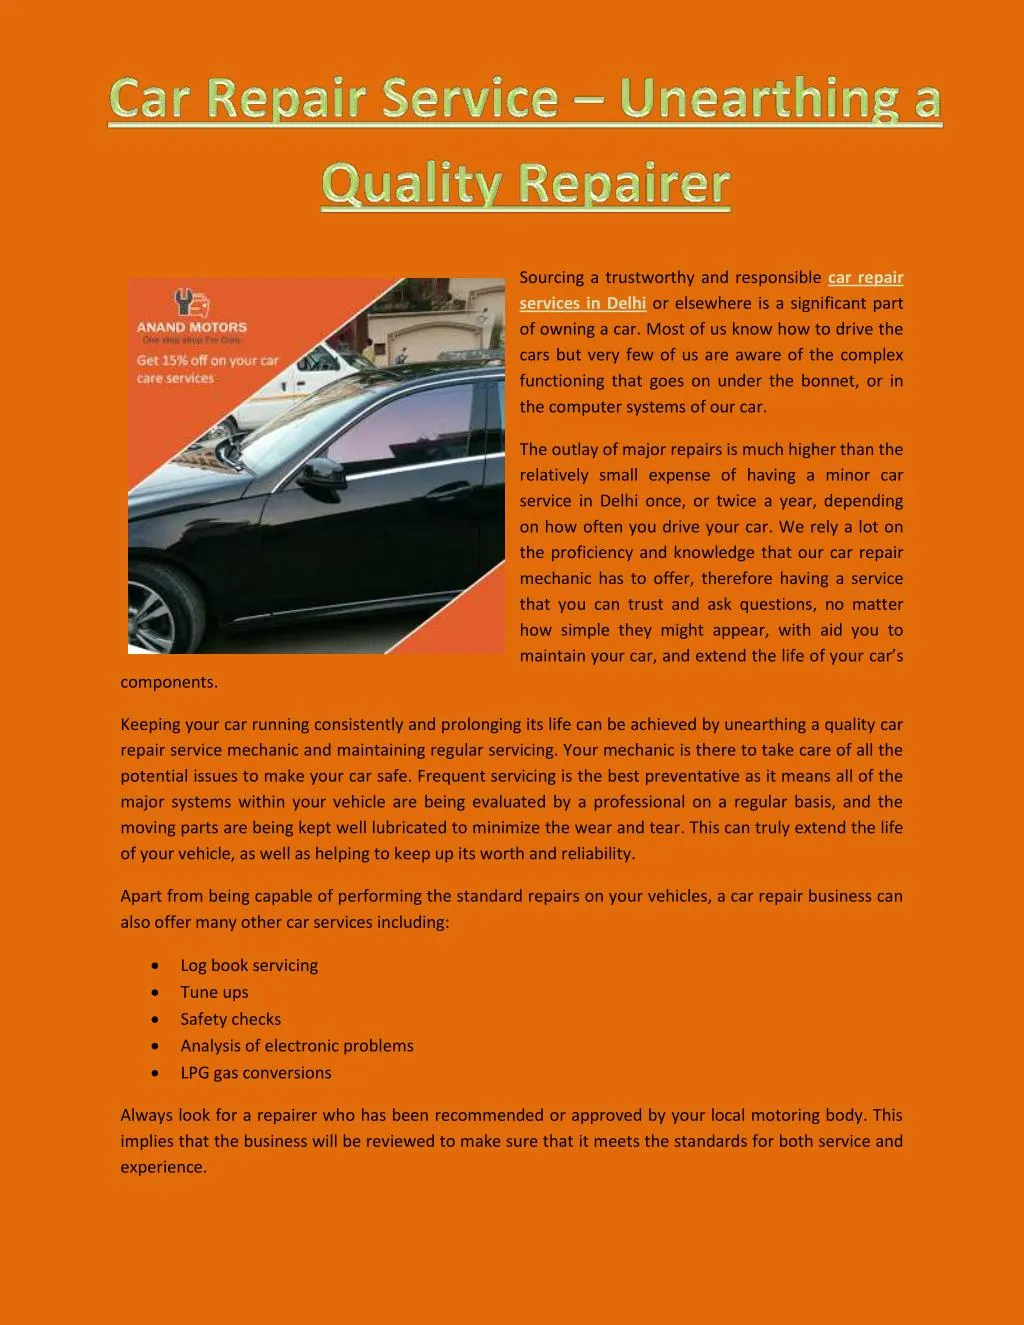 sourcing a trustworthy and responsible car repair